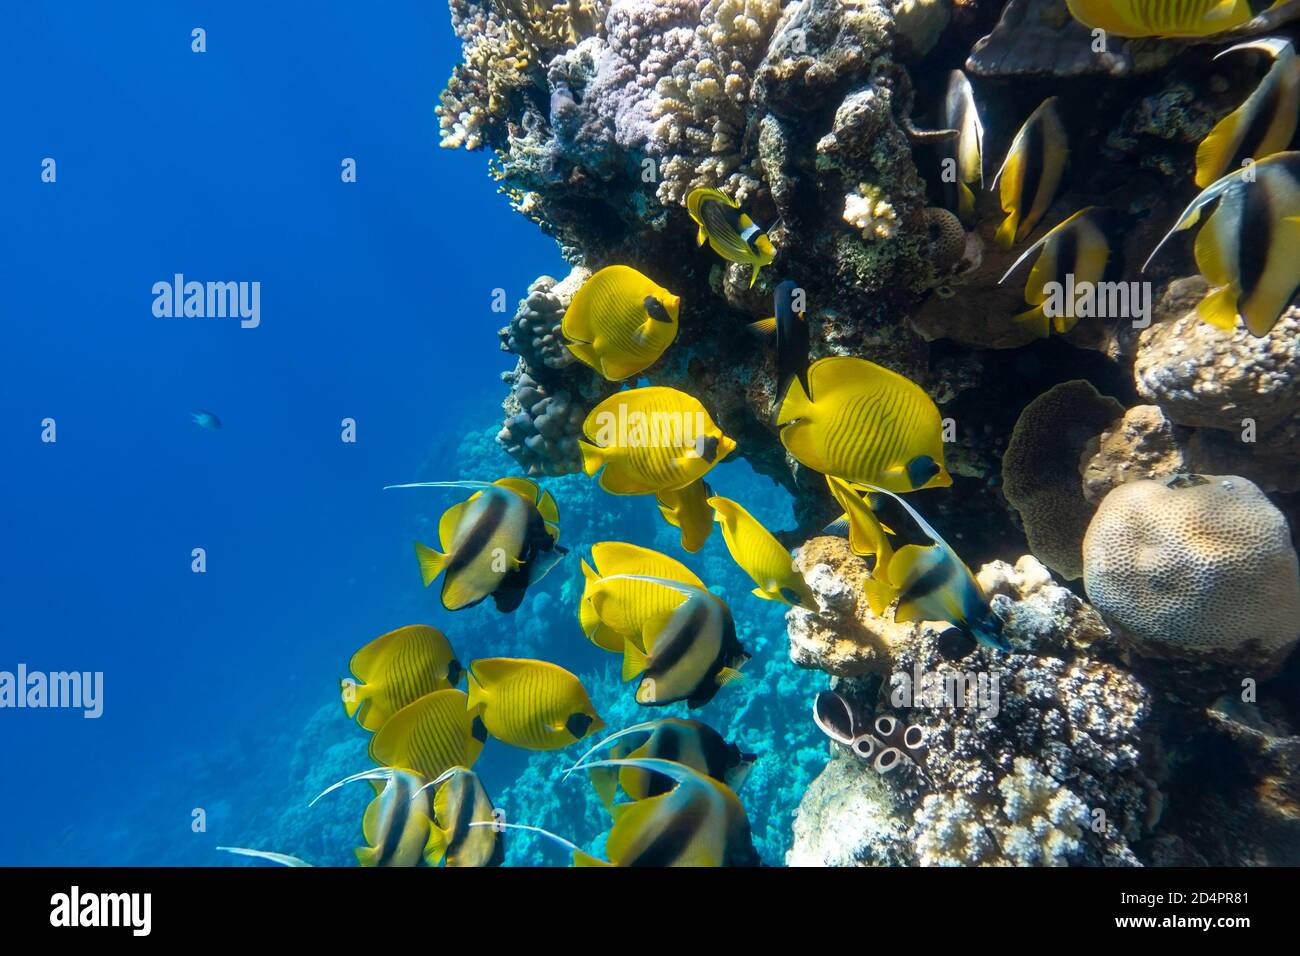 Large school of Butterflyfish (Chaetodon) in the coral reef, Red Sea, Egypt. Different types of bright yellow striped tropical fish in the ocean, clea Stock Photo